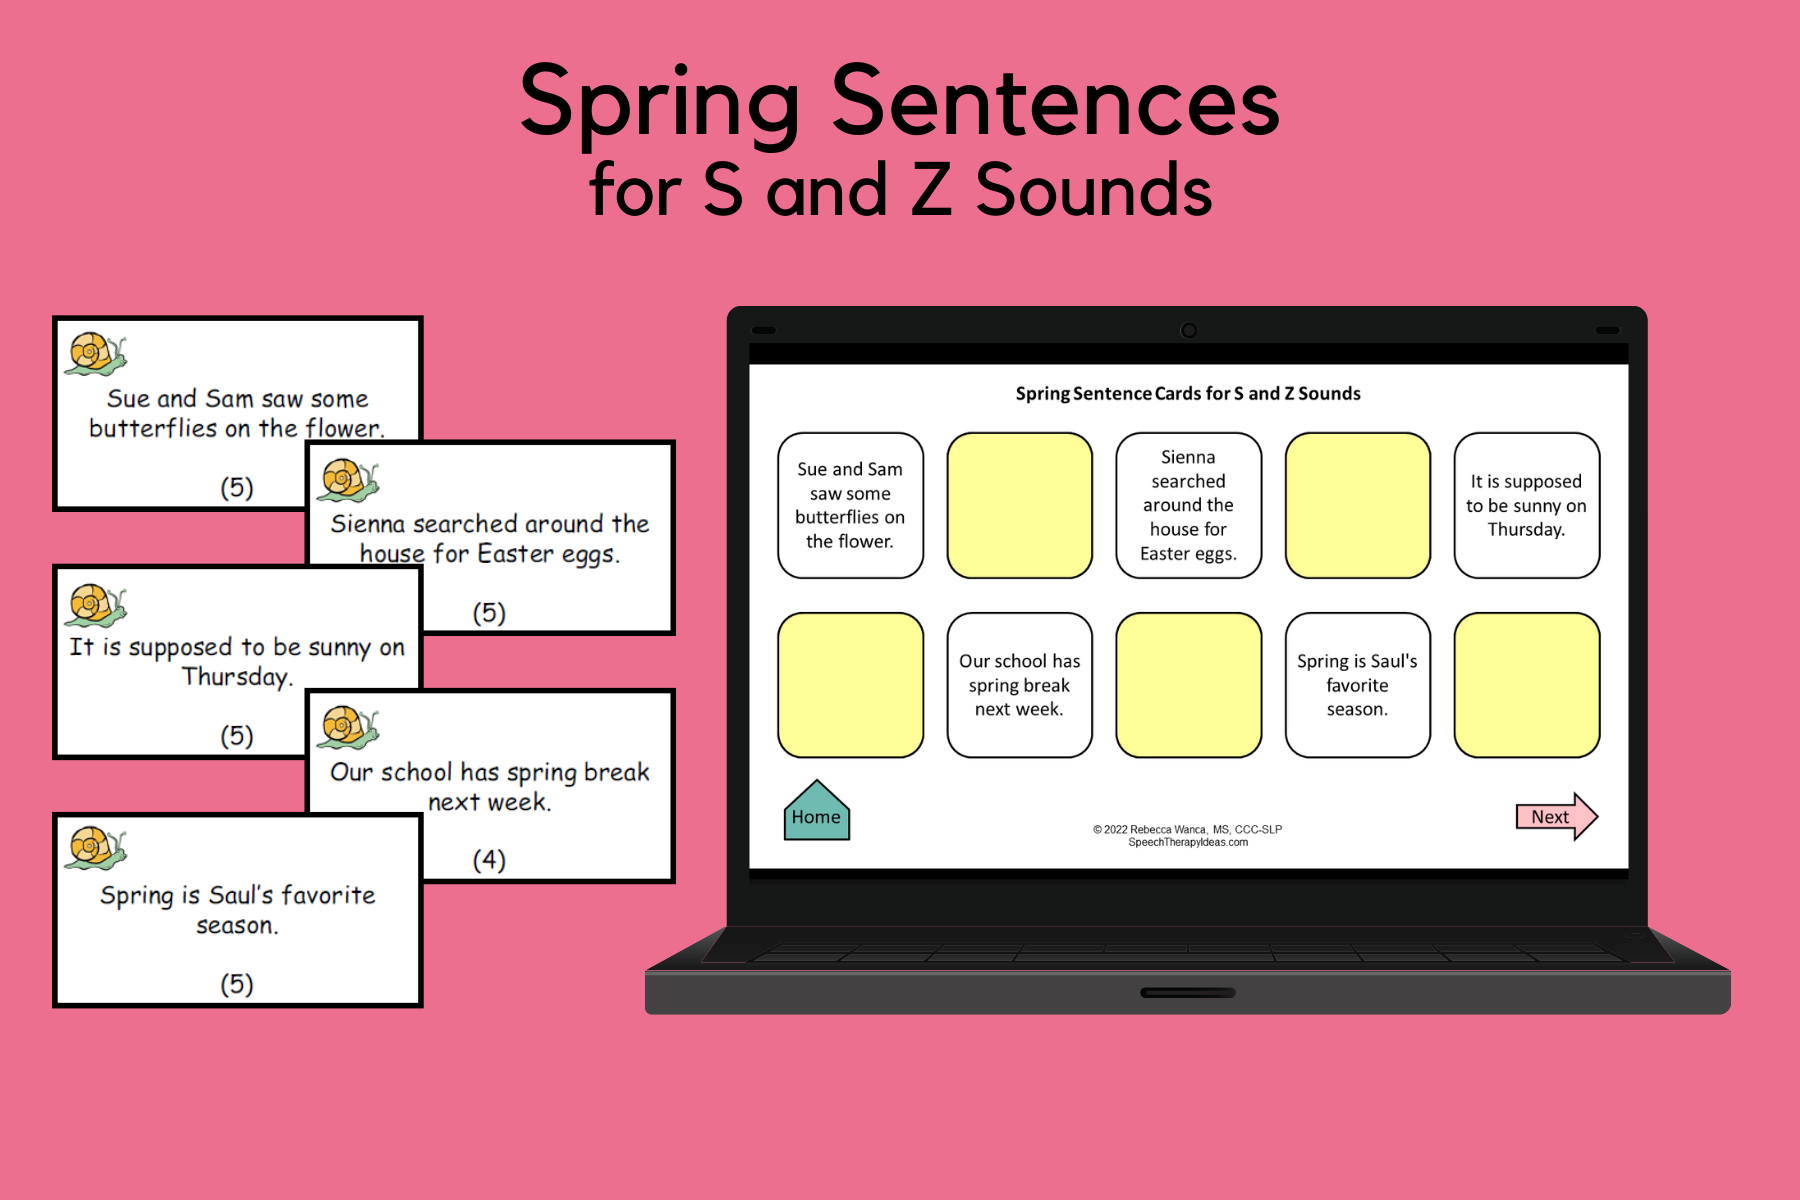 Spring Sentences for S and Z Sounds